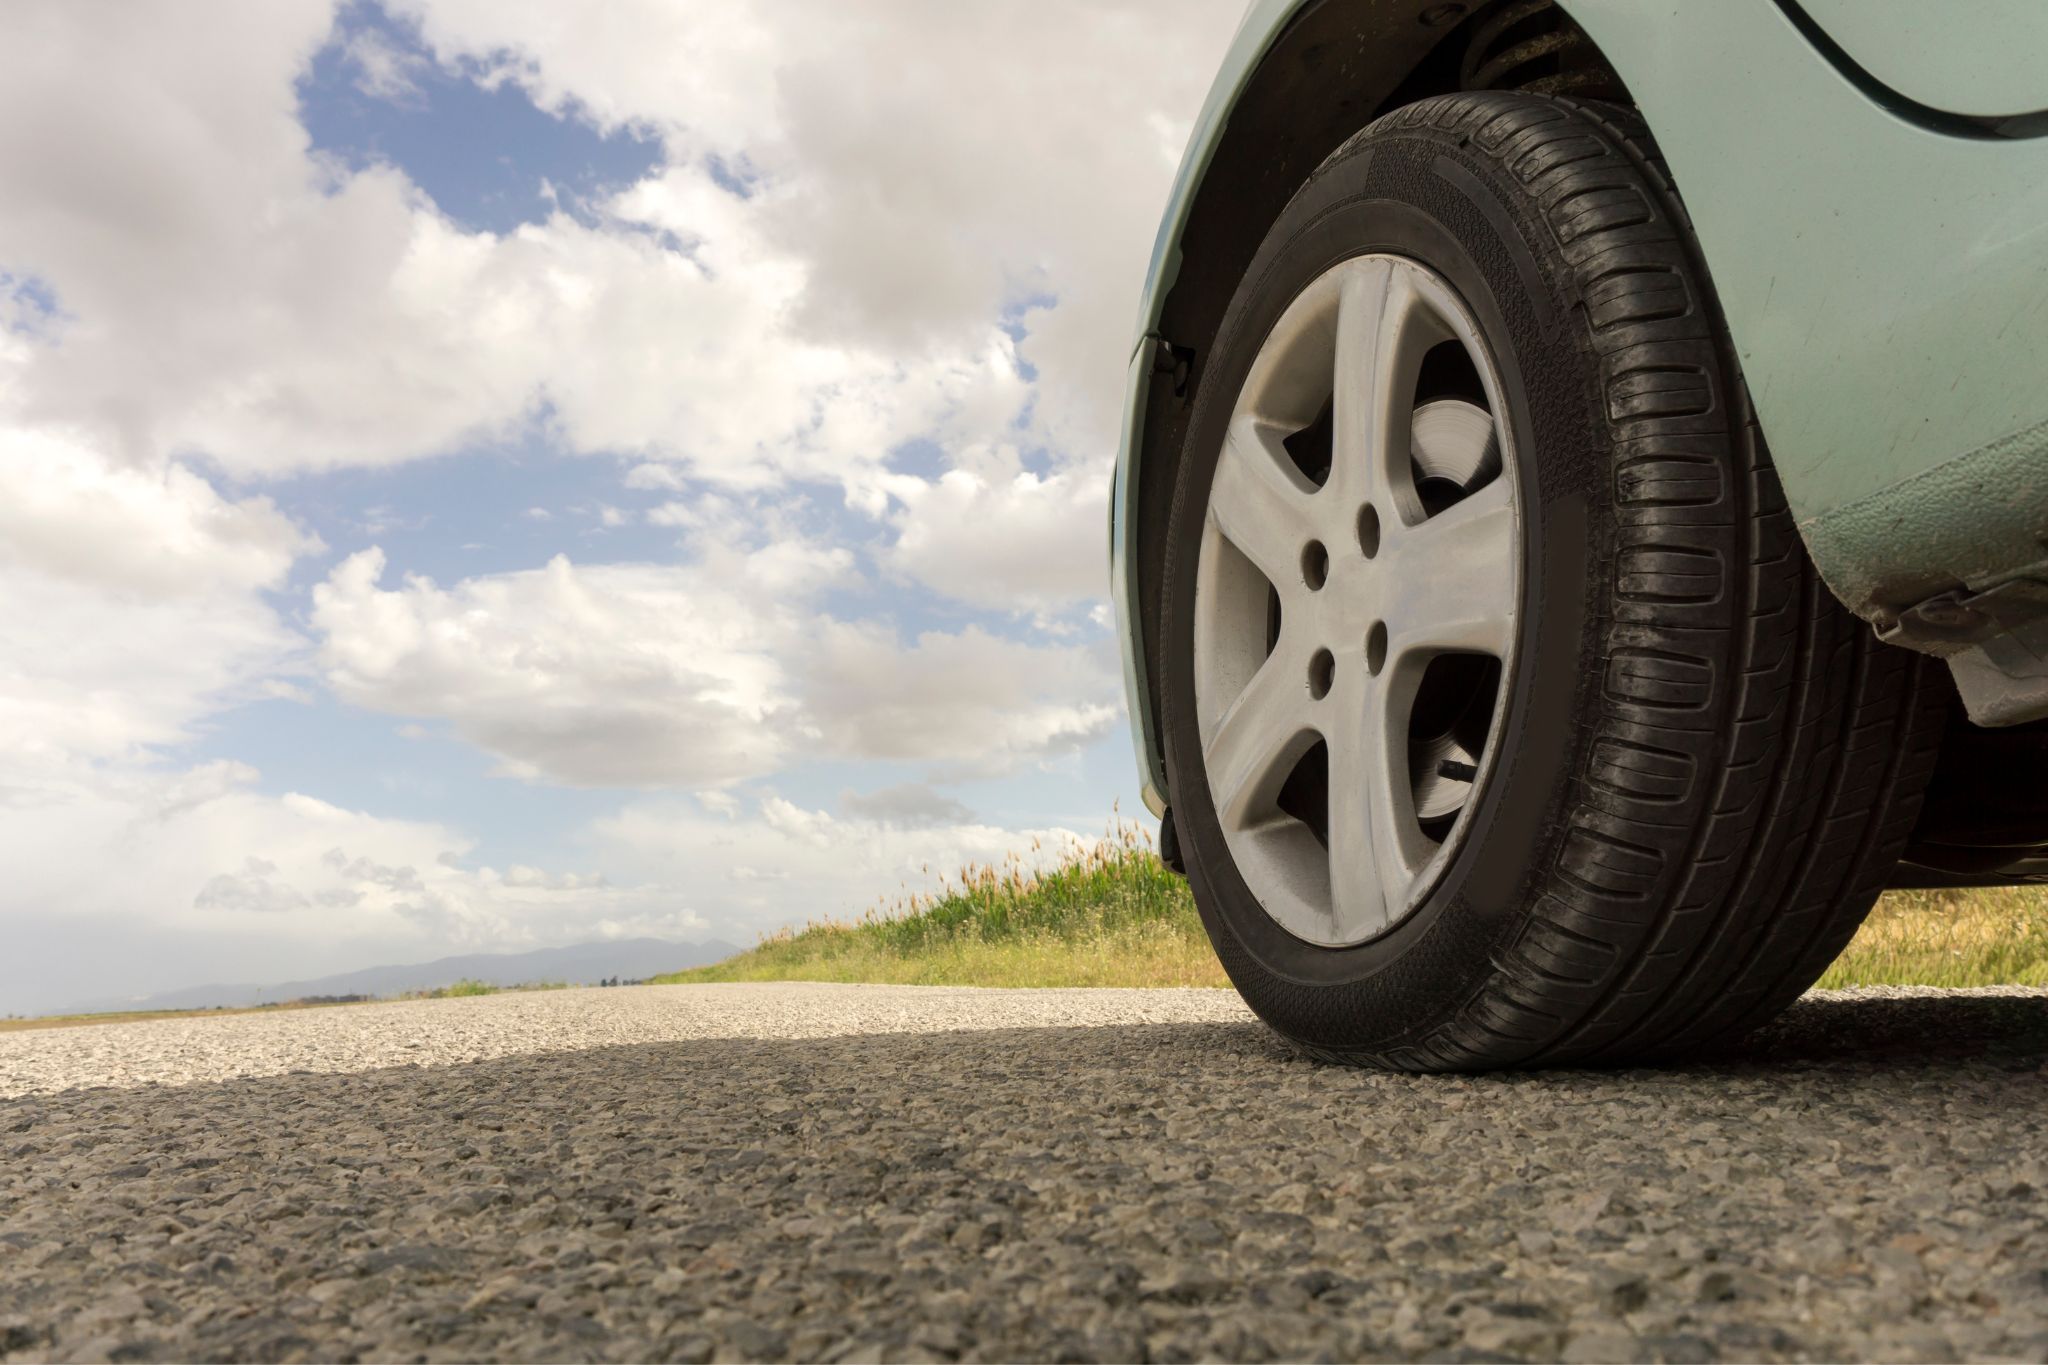 Can Uneven Tire Wear Cause Bumpy Drive?